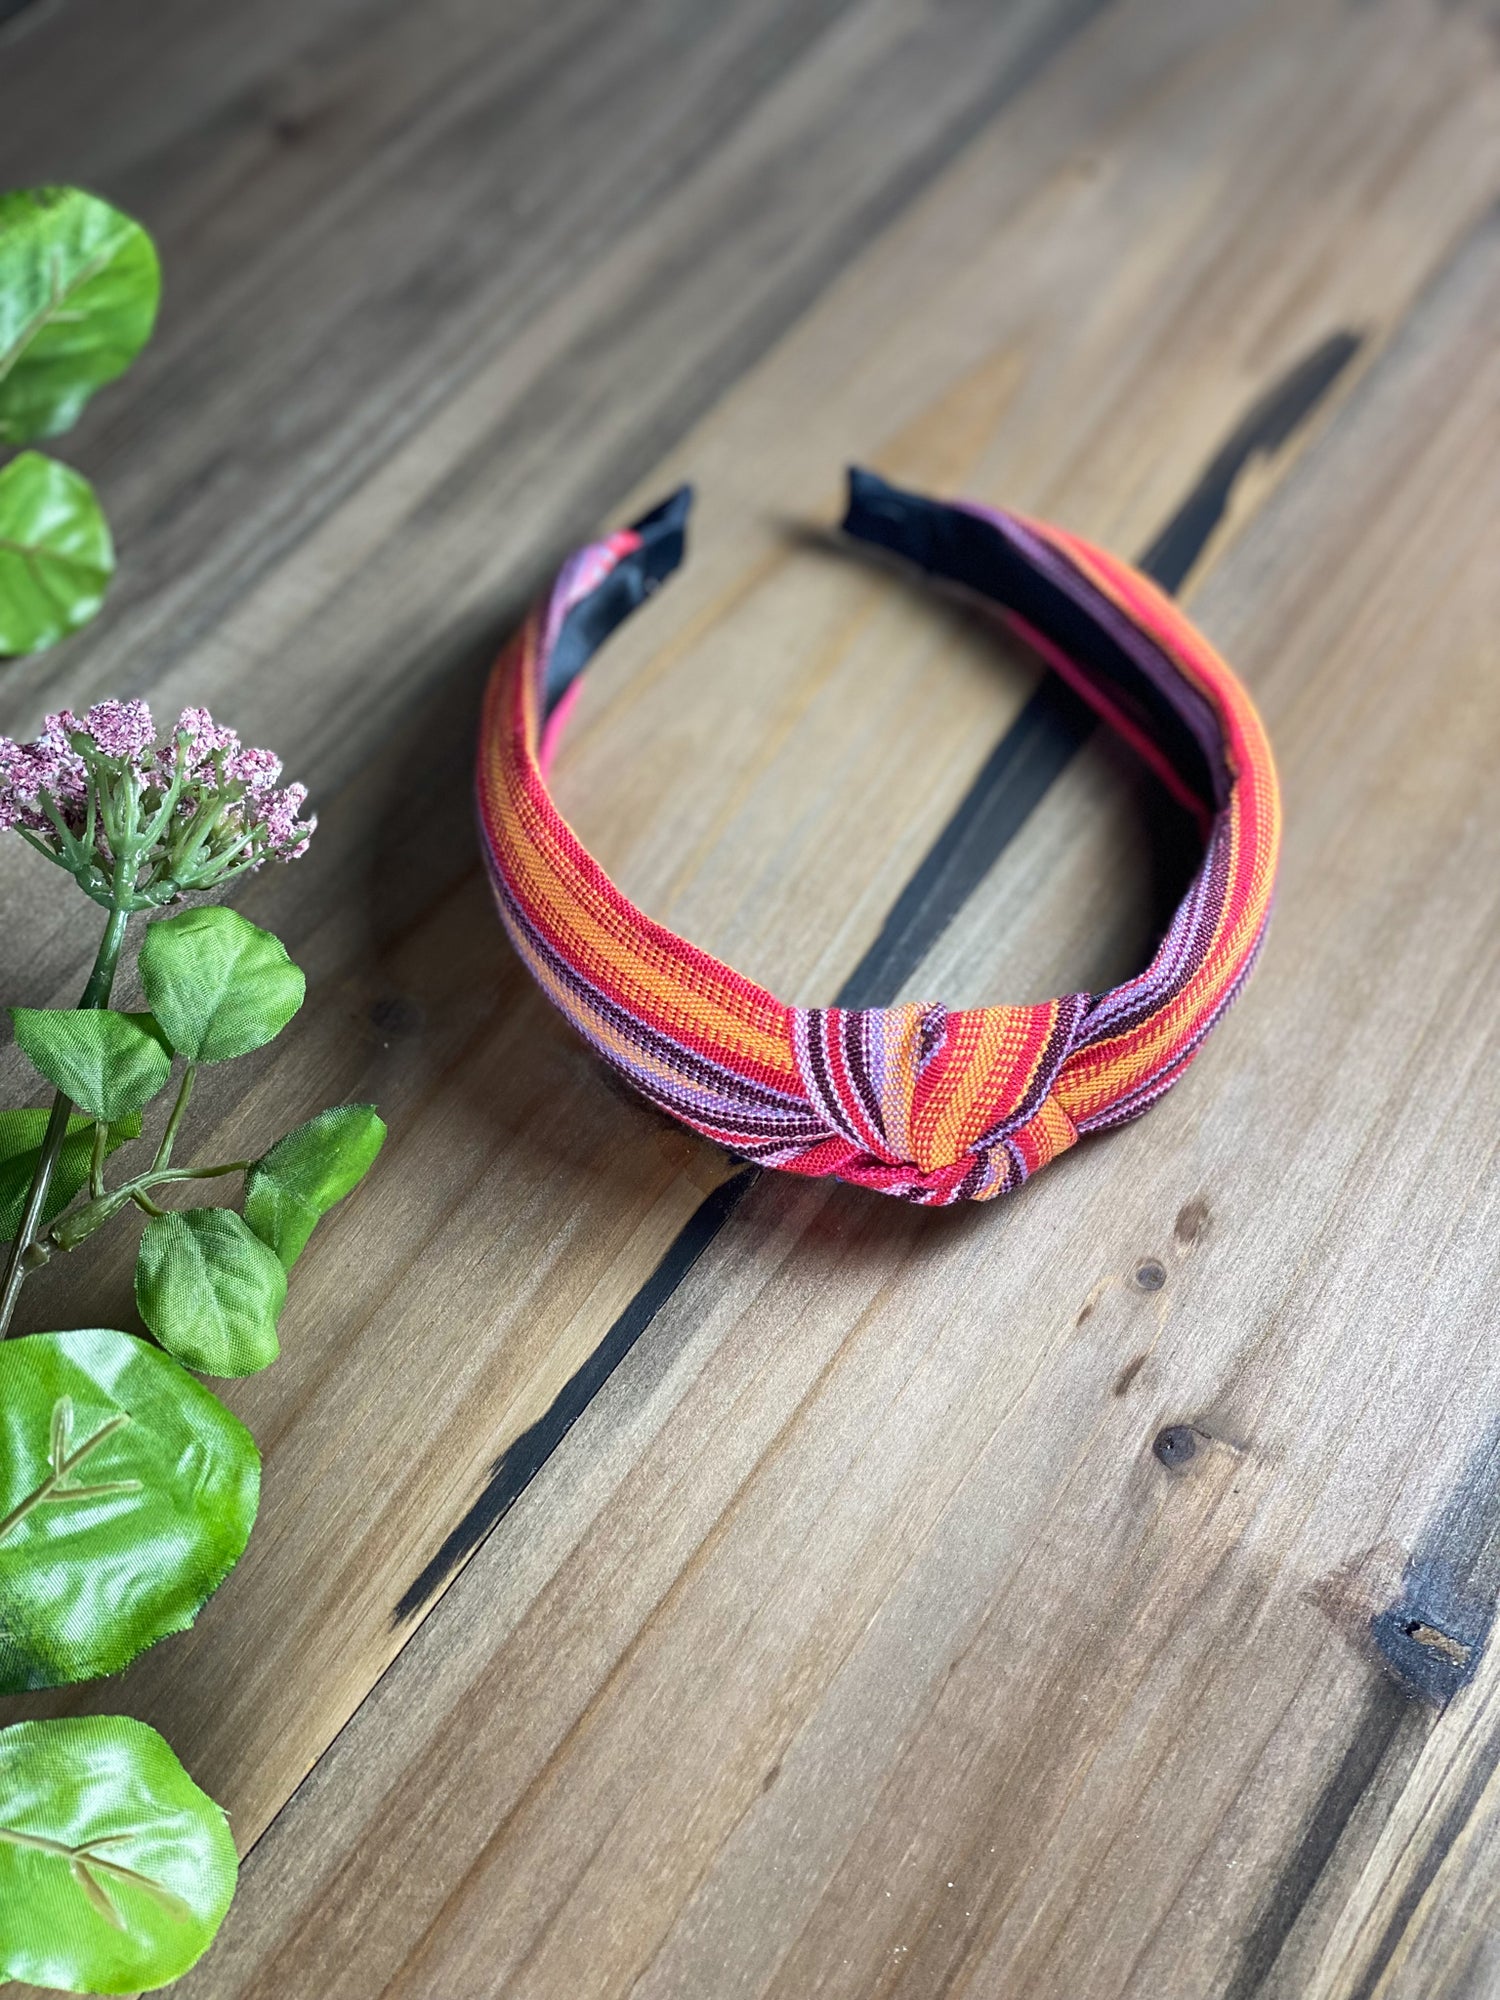 Jalapa Headbands. Handmade in Guatemala Handwoven Interacted Fabric  Knotted Detail Available in 5 different styles. Perfect for that pop of color in summer!